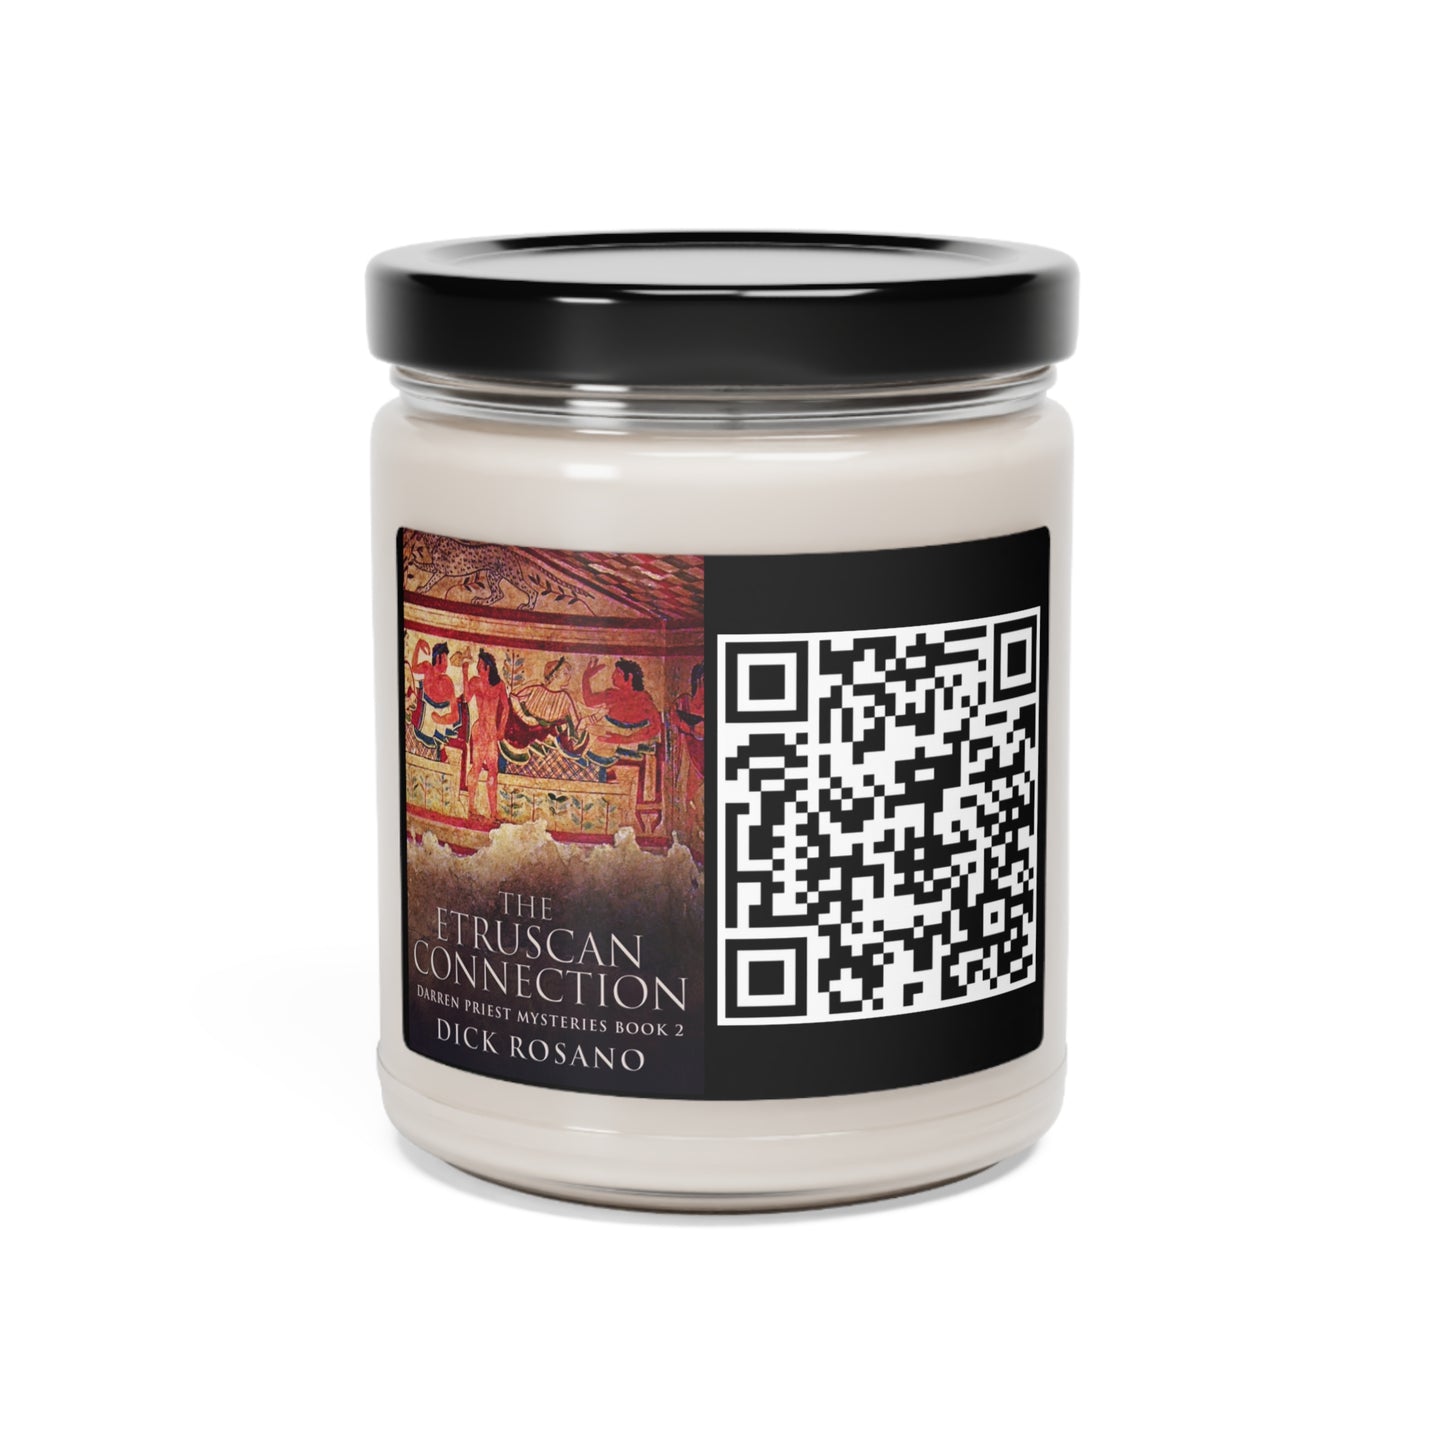 The Etruscan Connection - Scented Soy Candle